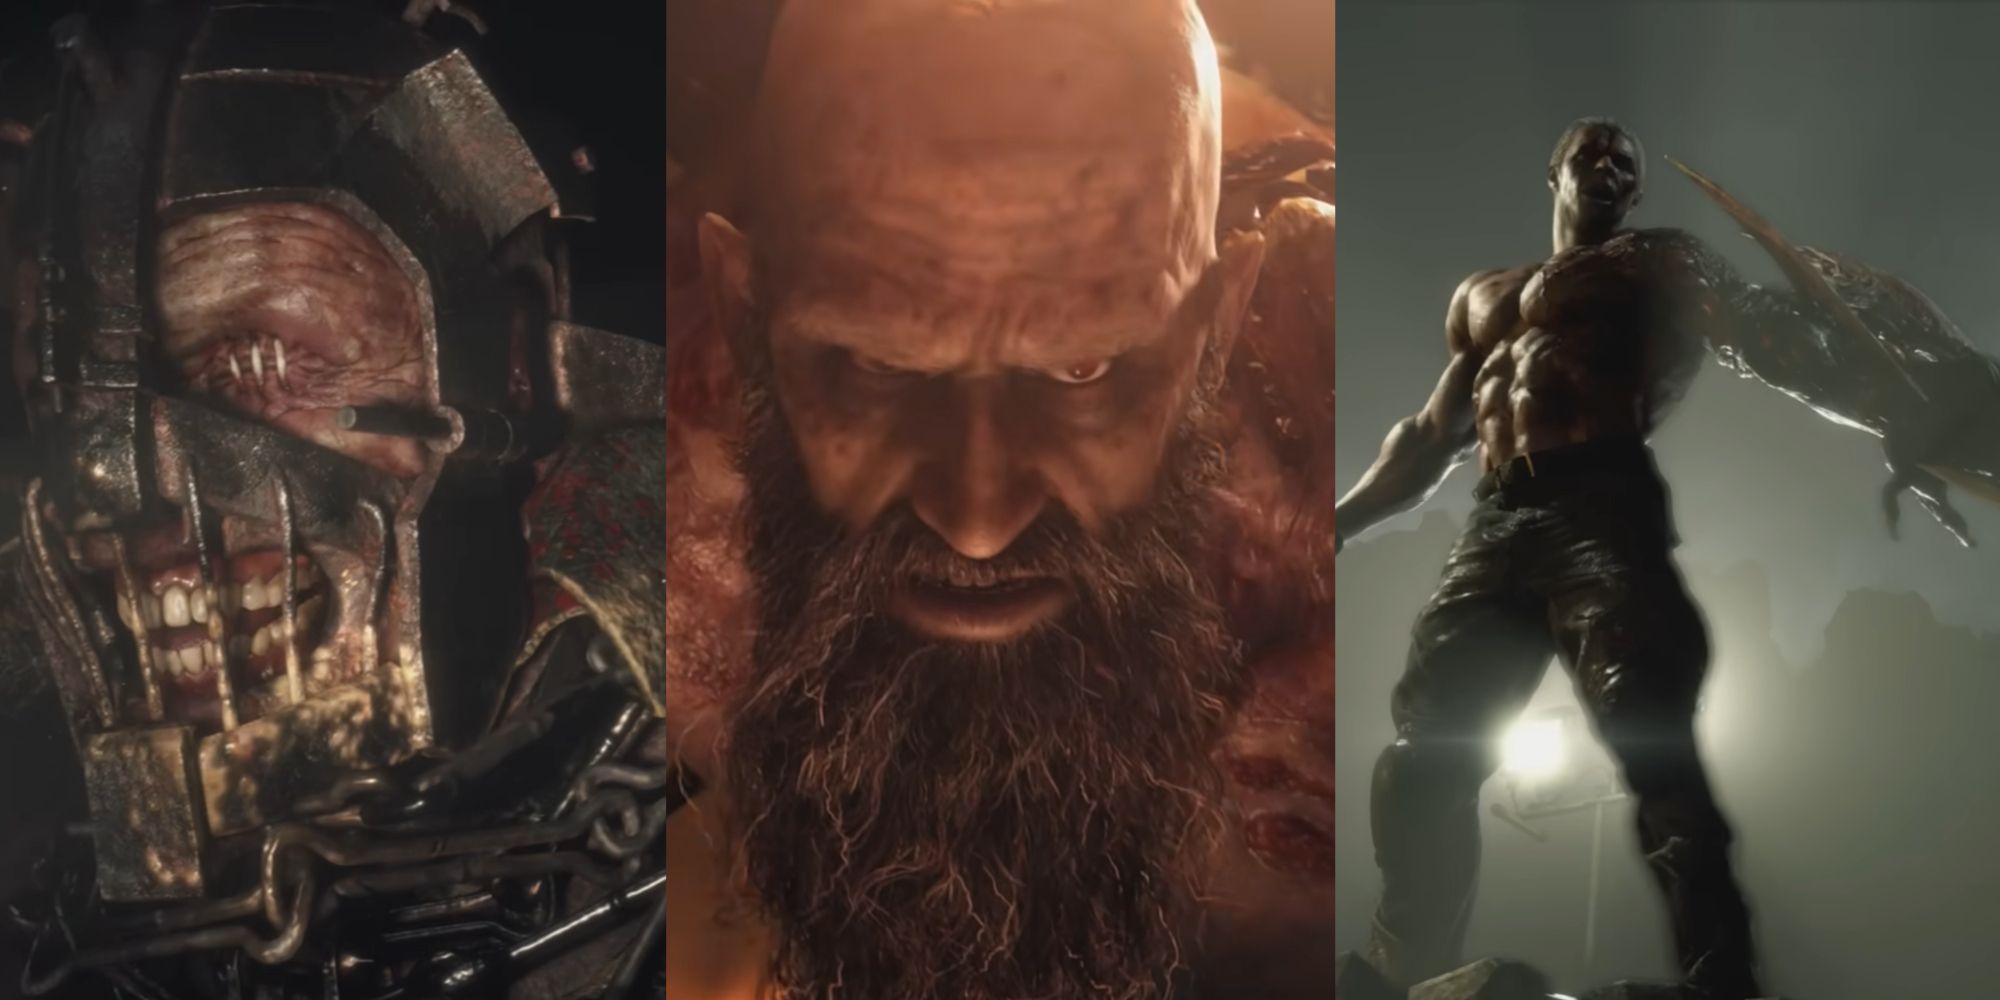 Three images from left to right: close-up of Garrador,  close-up of Mendez, Mutant Jack Krauser backlit